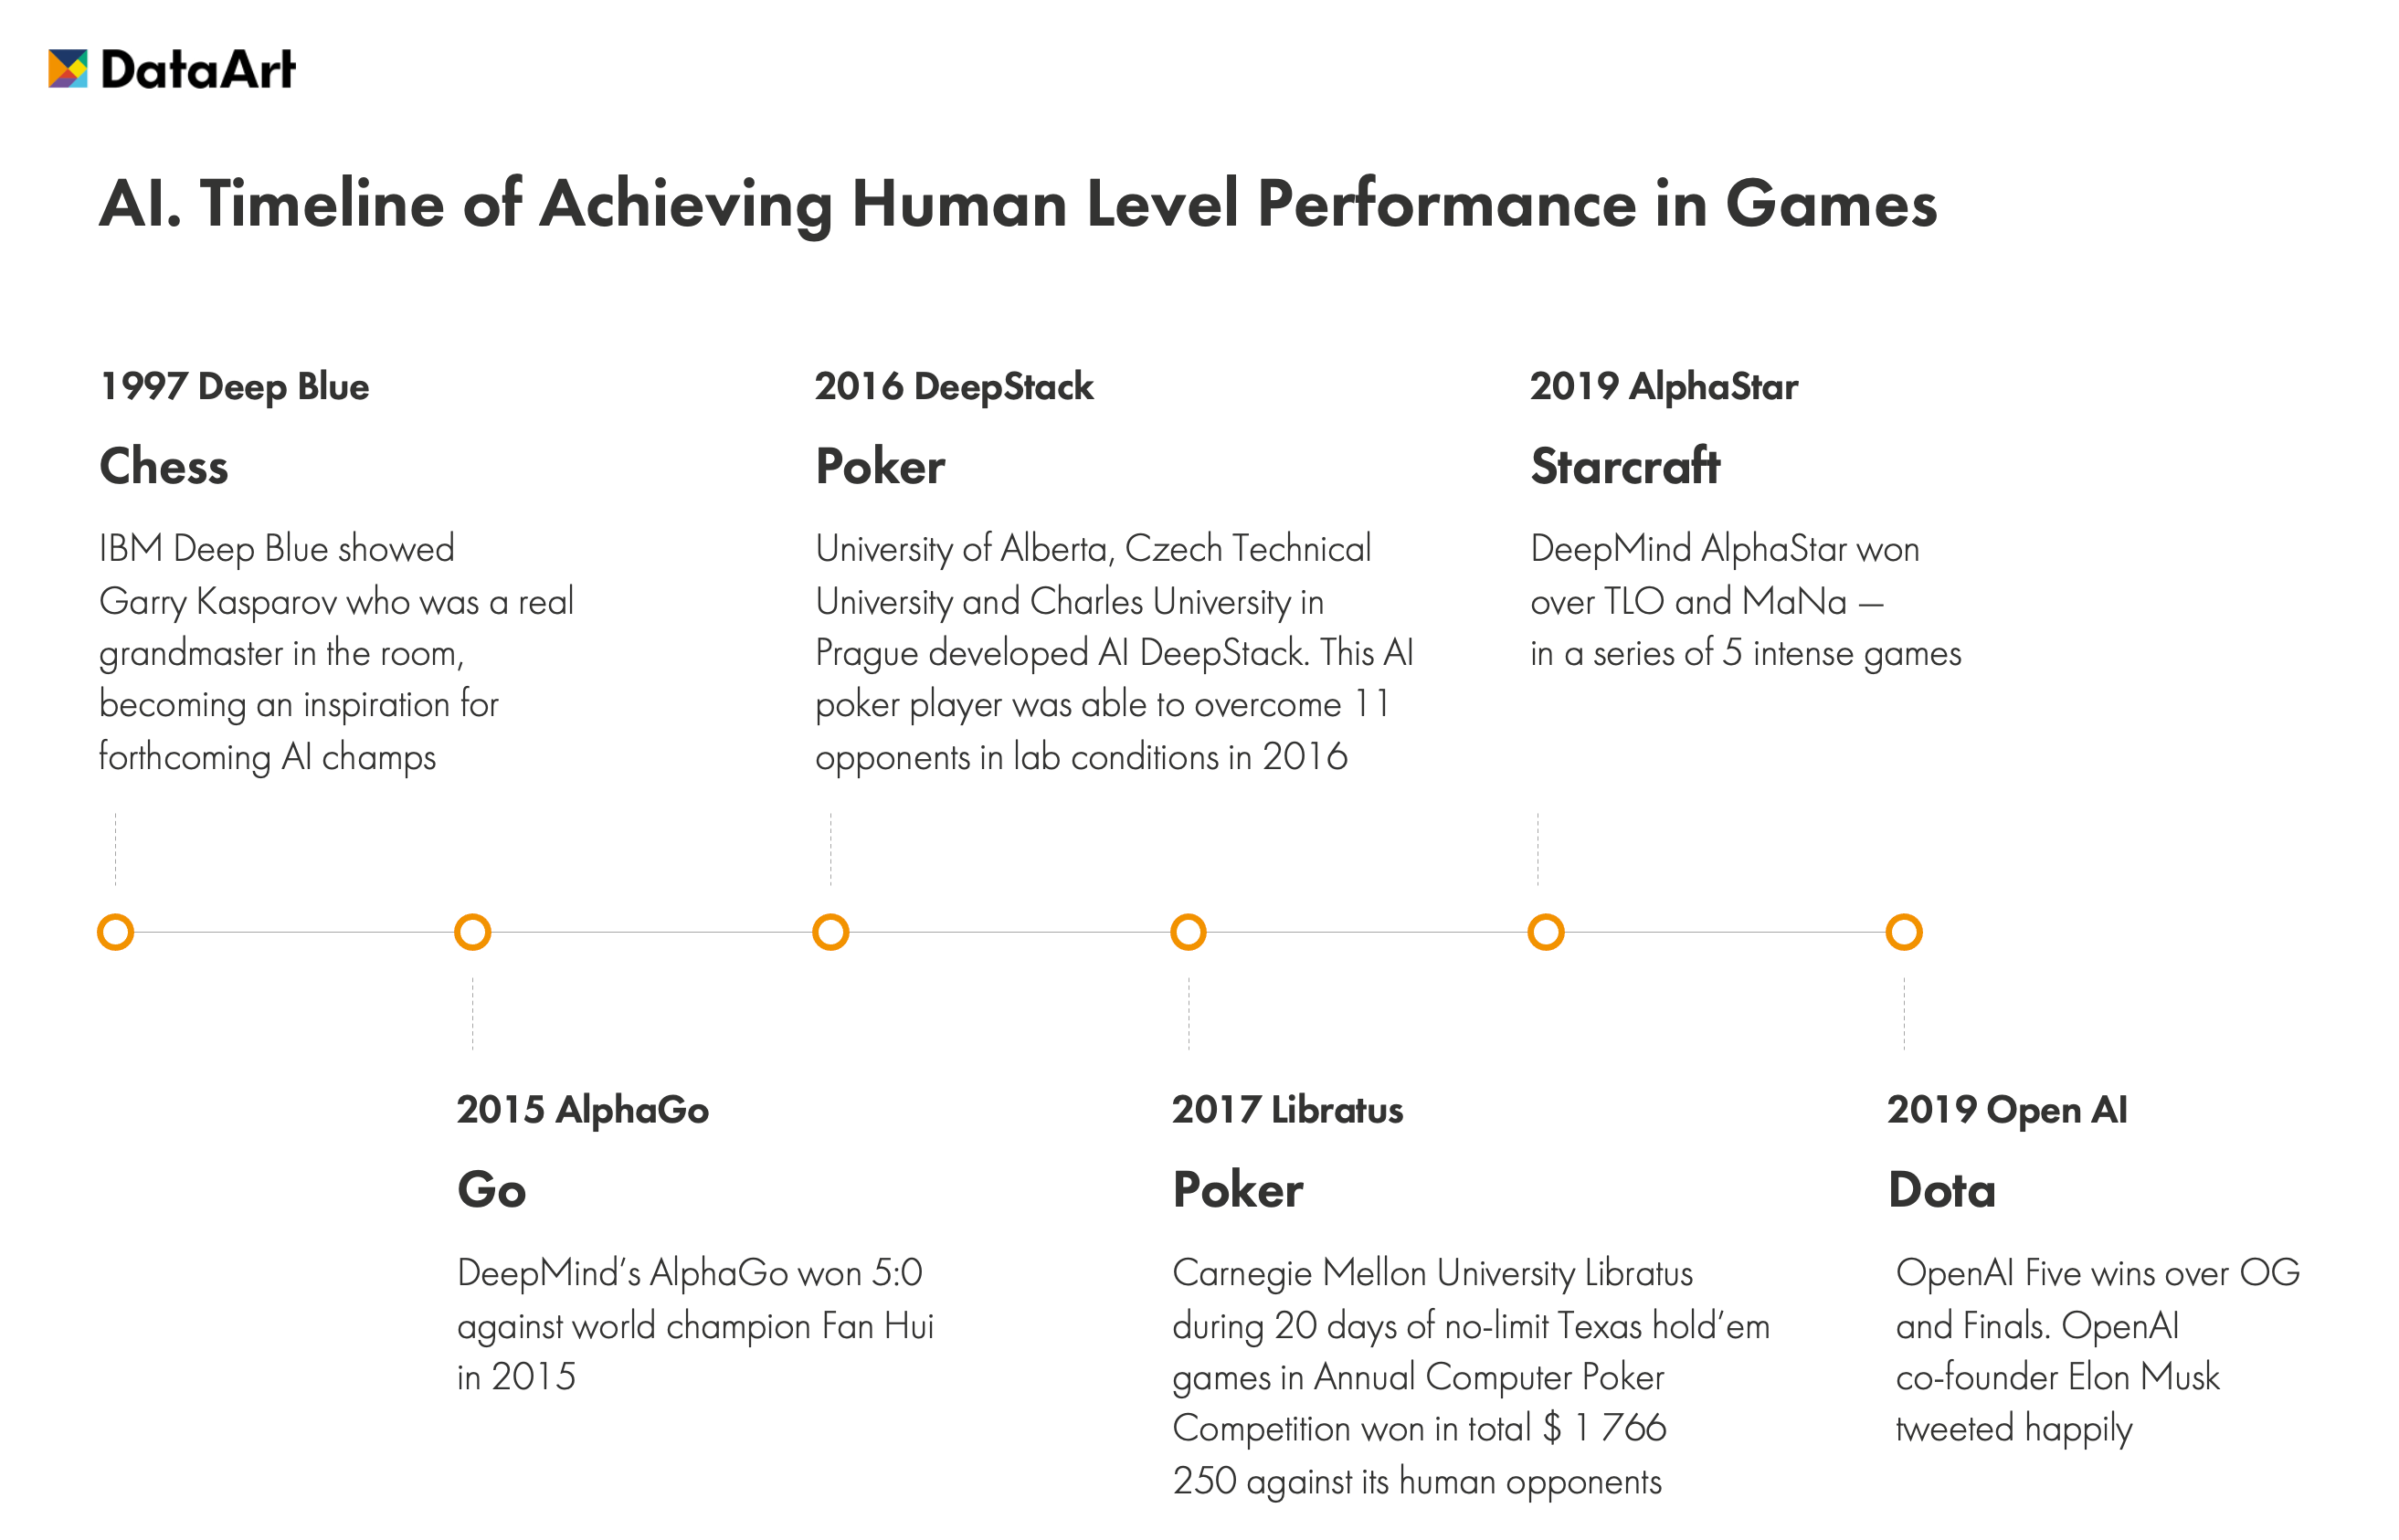 How AI Achieved Human Level Performance in Games: Timeline